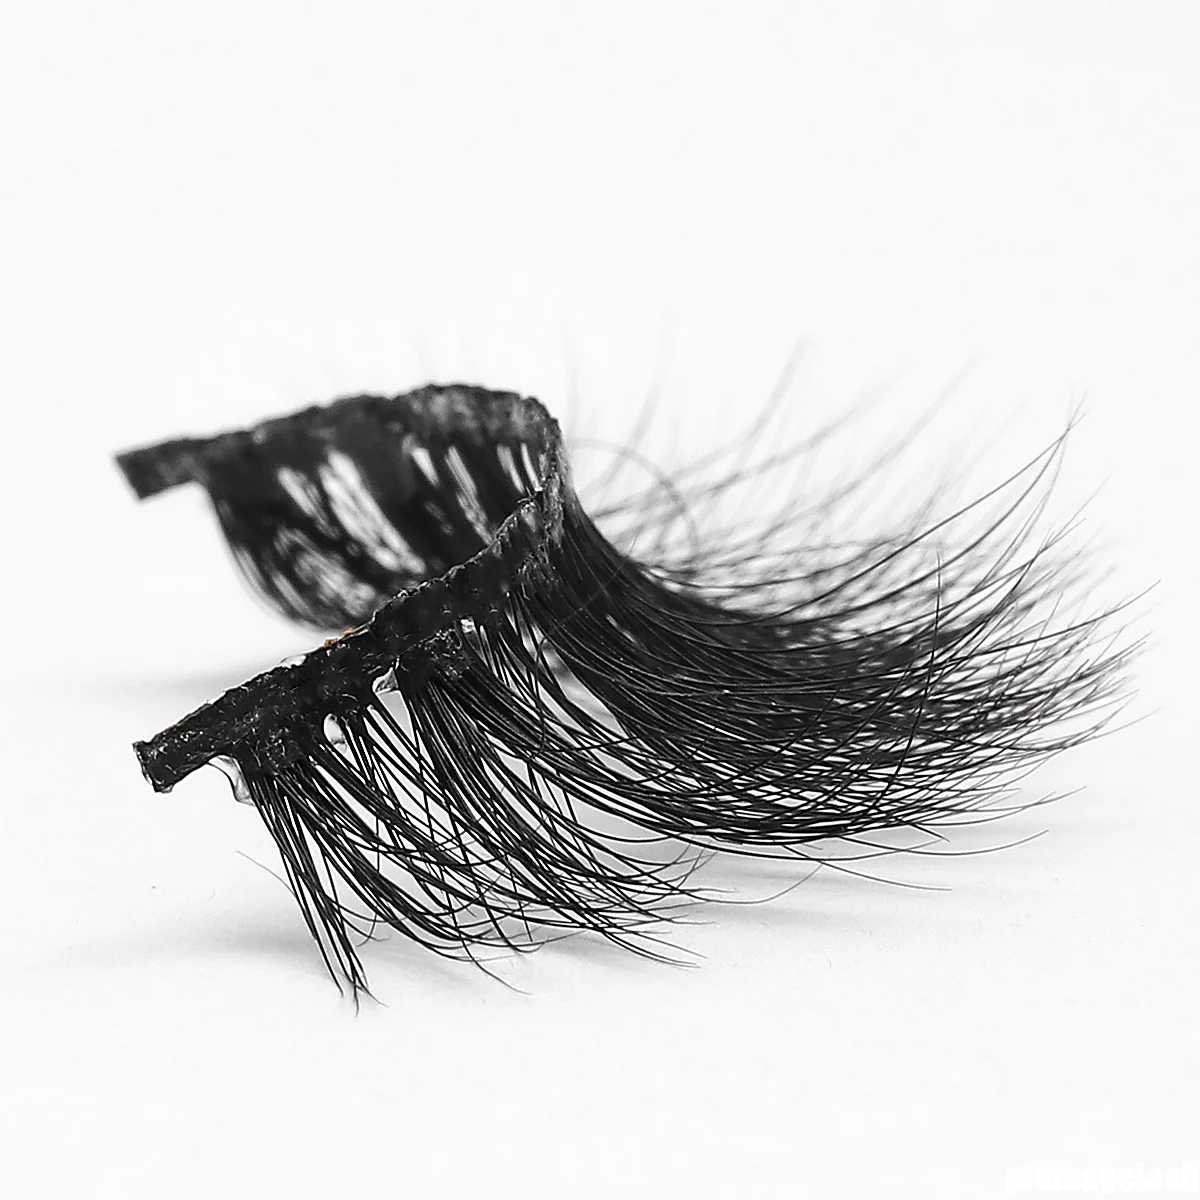 Luxury Hand Made High Quality Real Beautiful 3D Mink Eyelashes